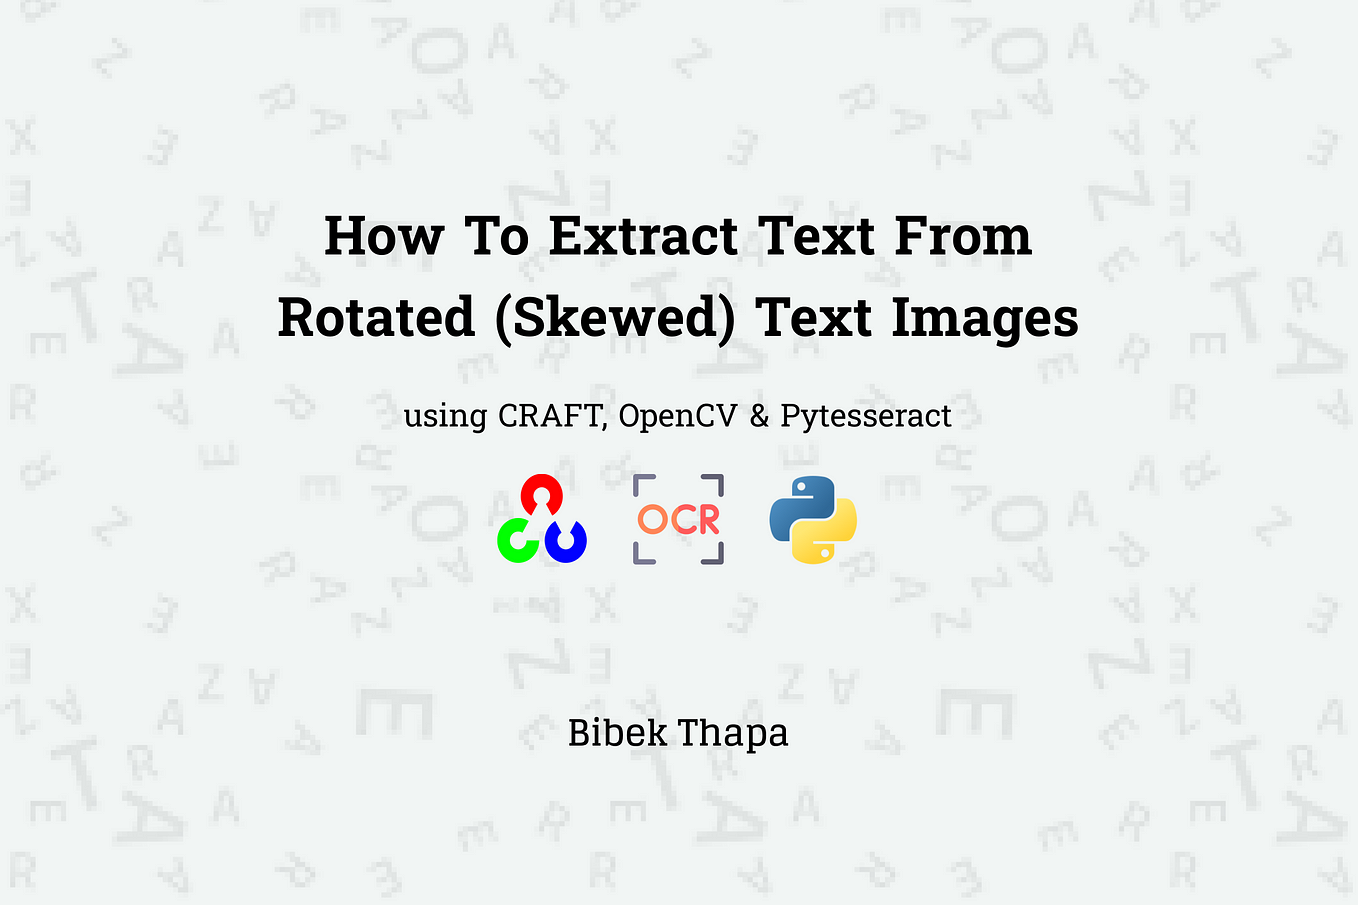 How to Extract Texts from Rotated(Skewed) Text-Images using CRAFT, OpenCV and pytesseract